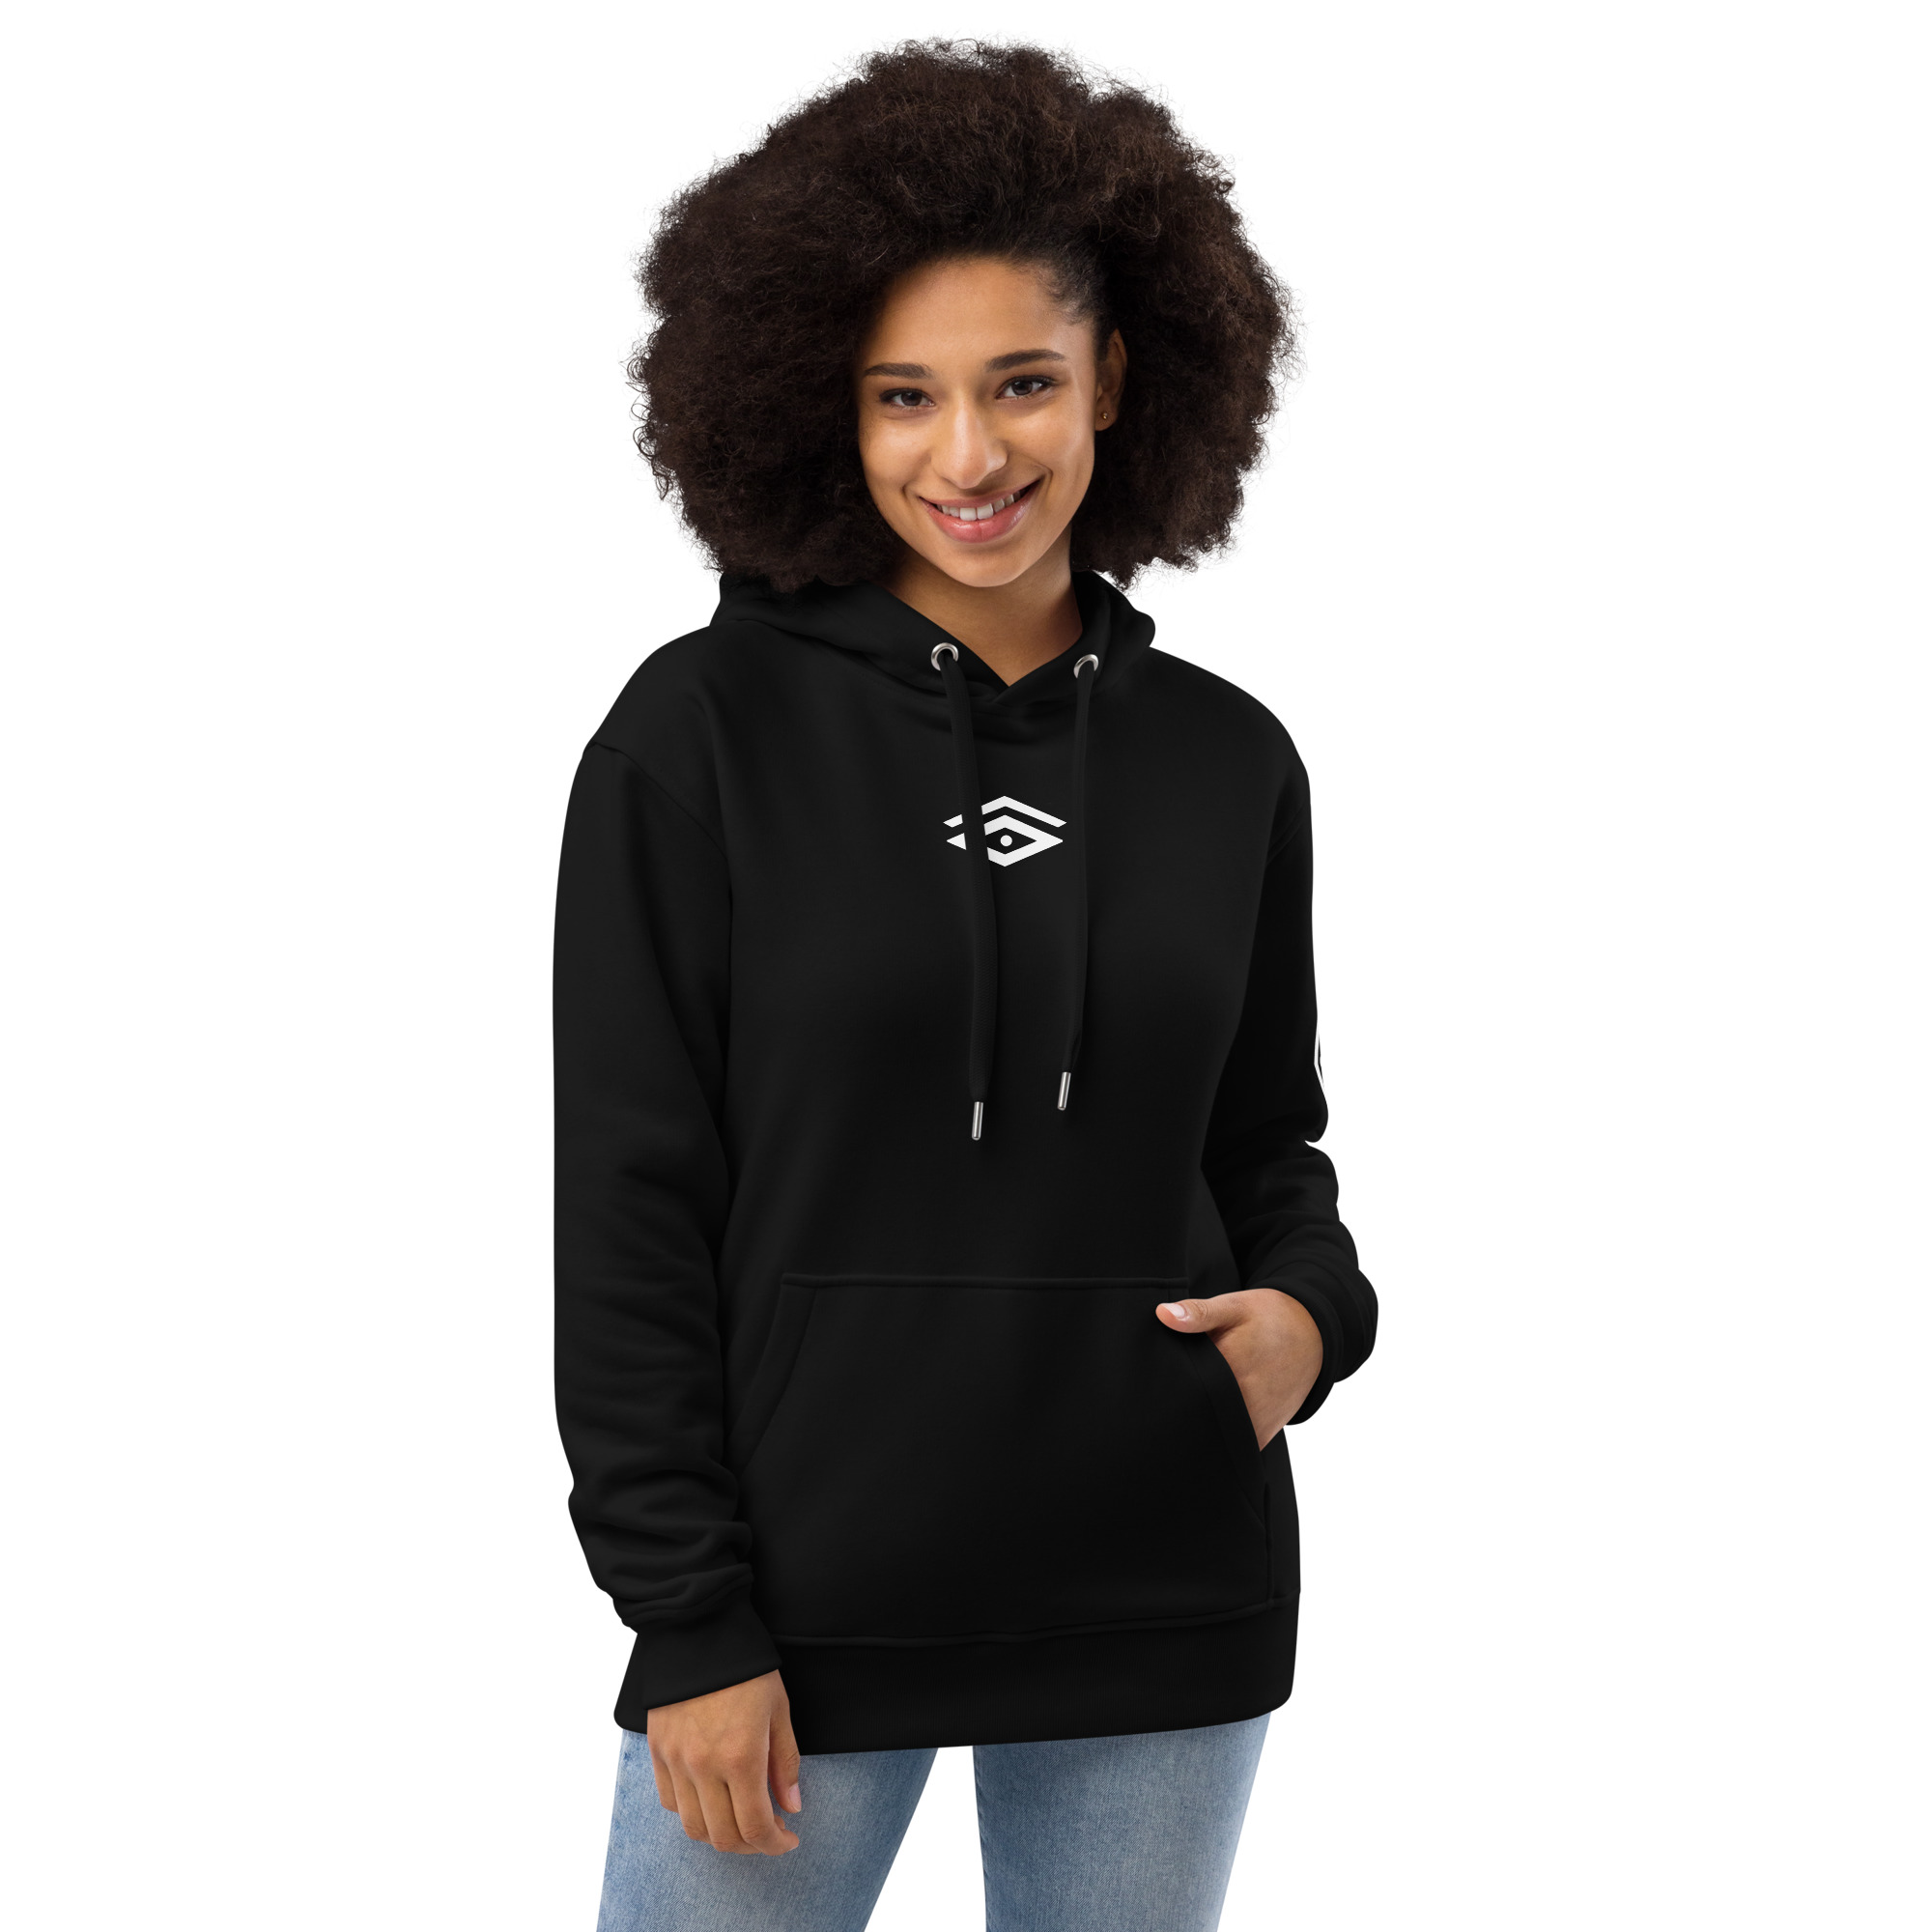 premium-eco-hoodie-black-front-63036a90a0ad3.jpg